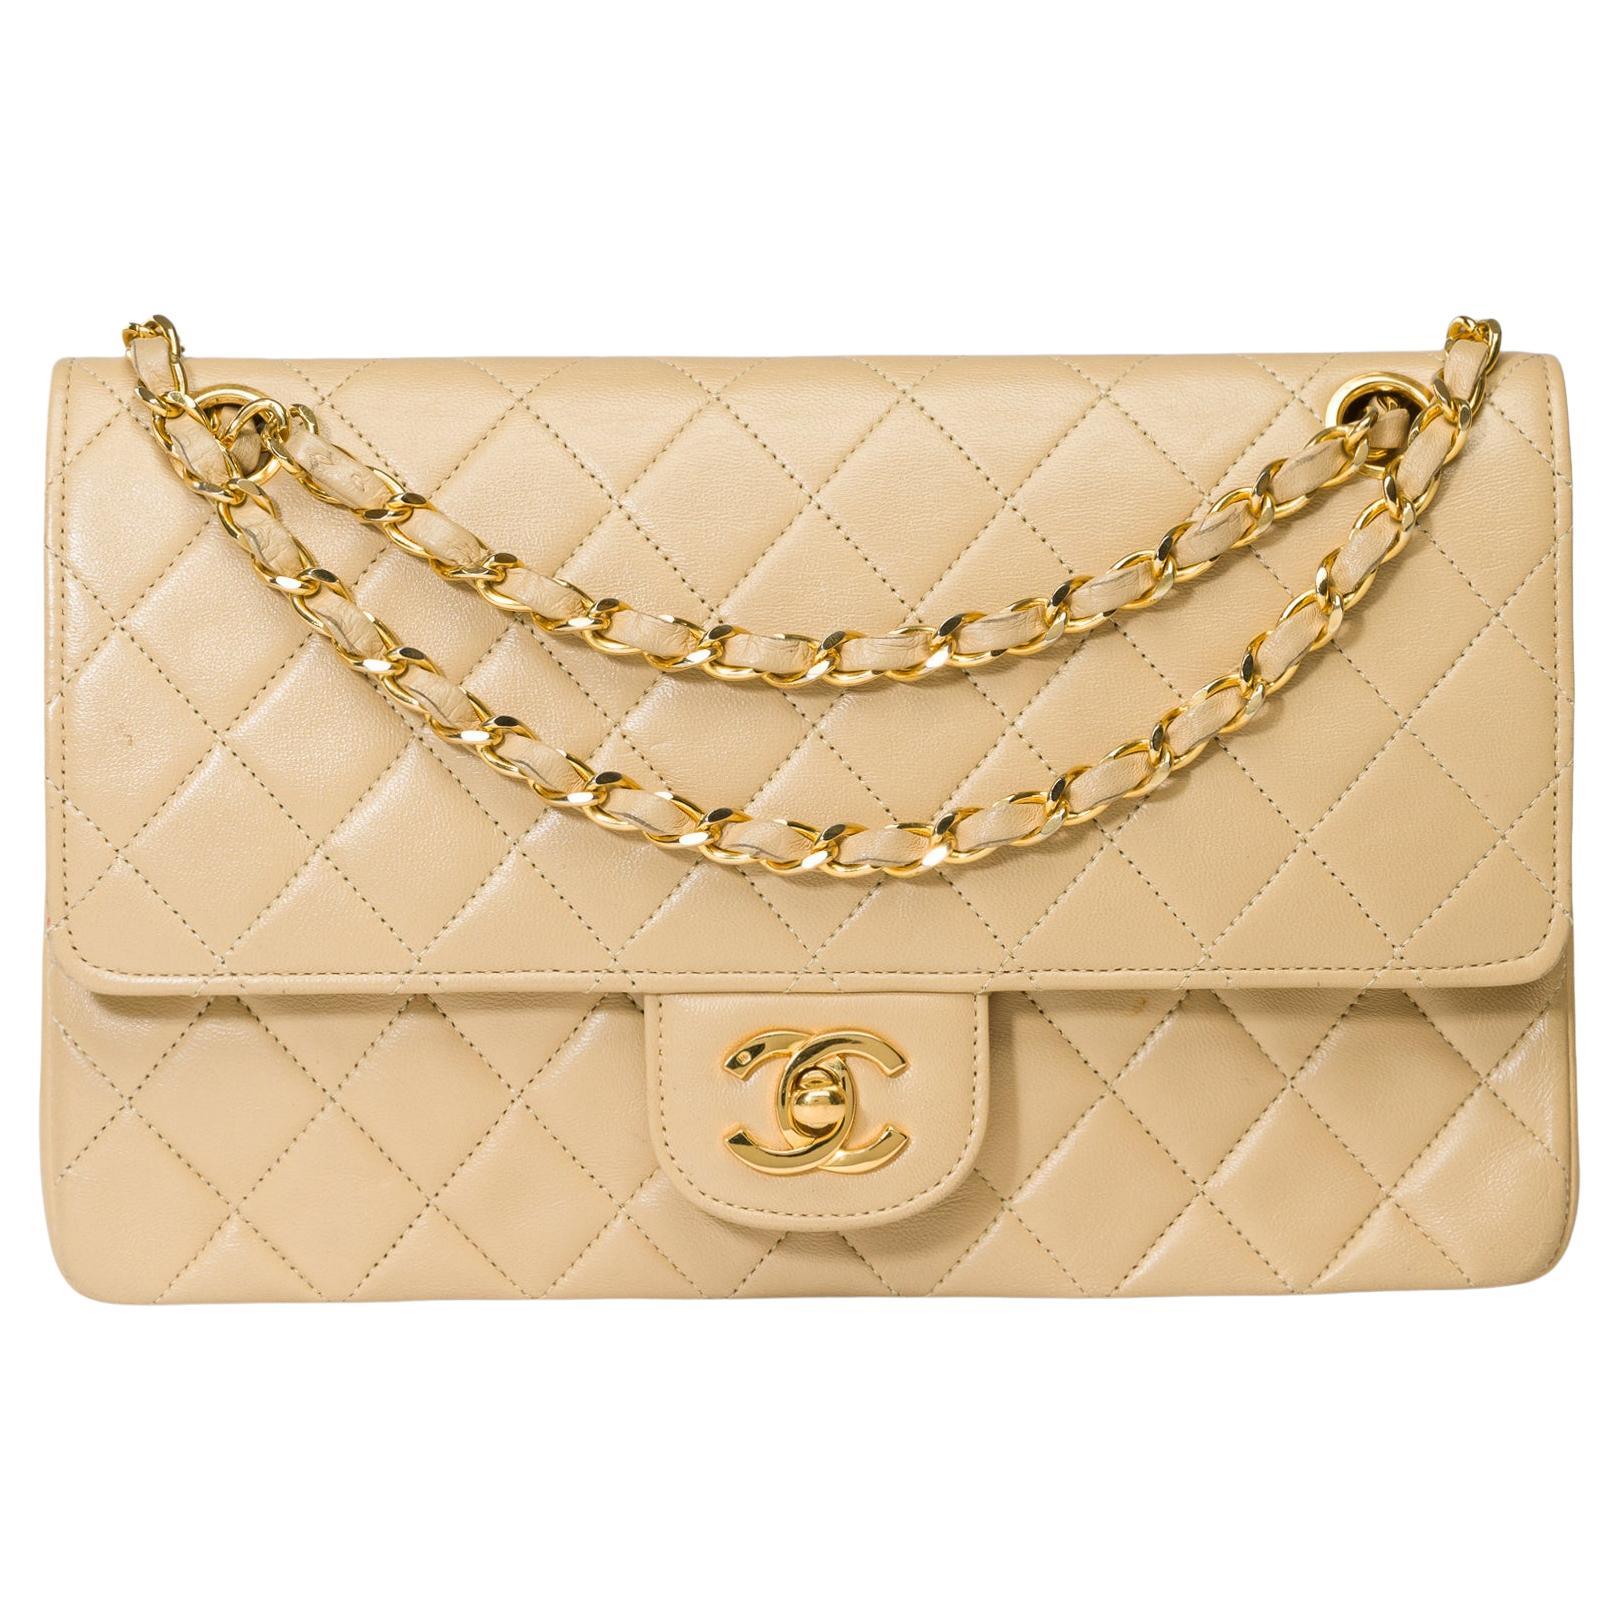 Chanel Timeless double flap shoulder bag in beige quilted lambskin leather, GHW For Sale